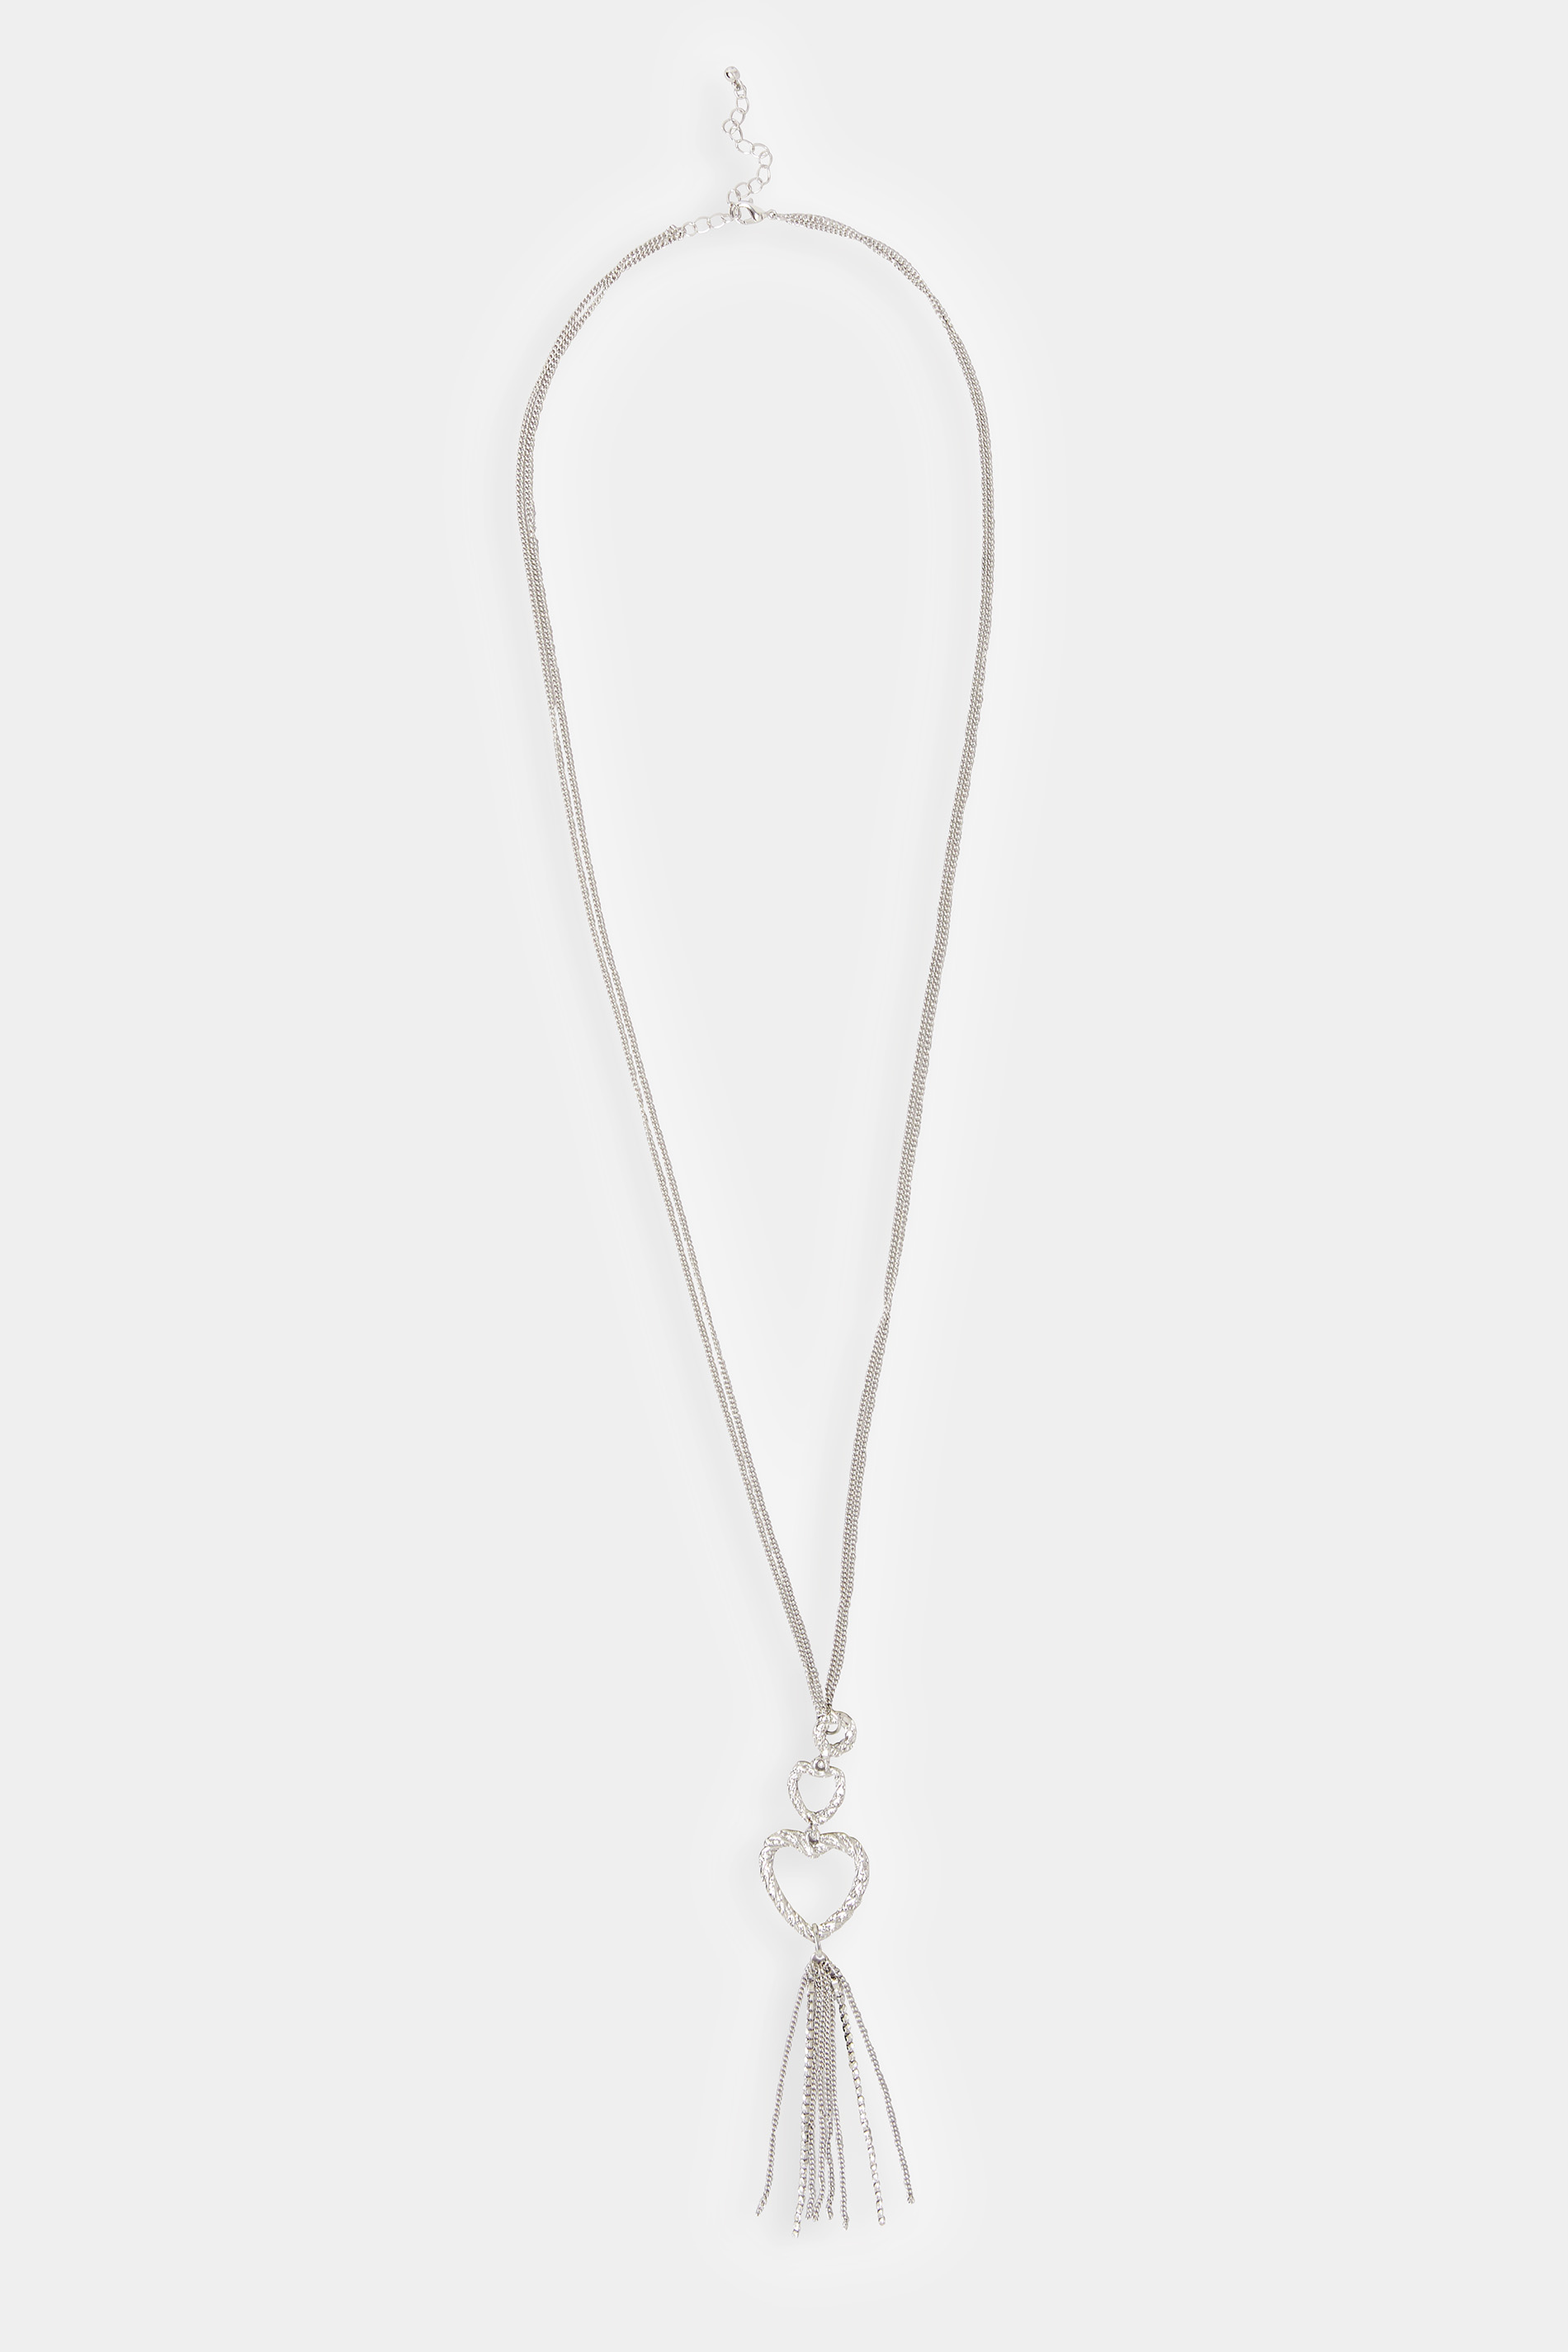 Silver Tone Heart Tassel Necklace | Yours Clothing 2